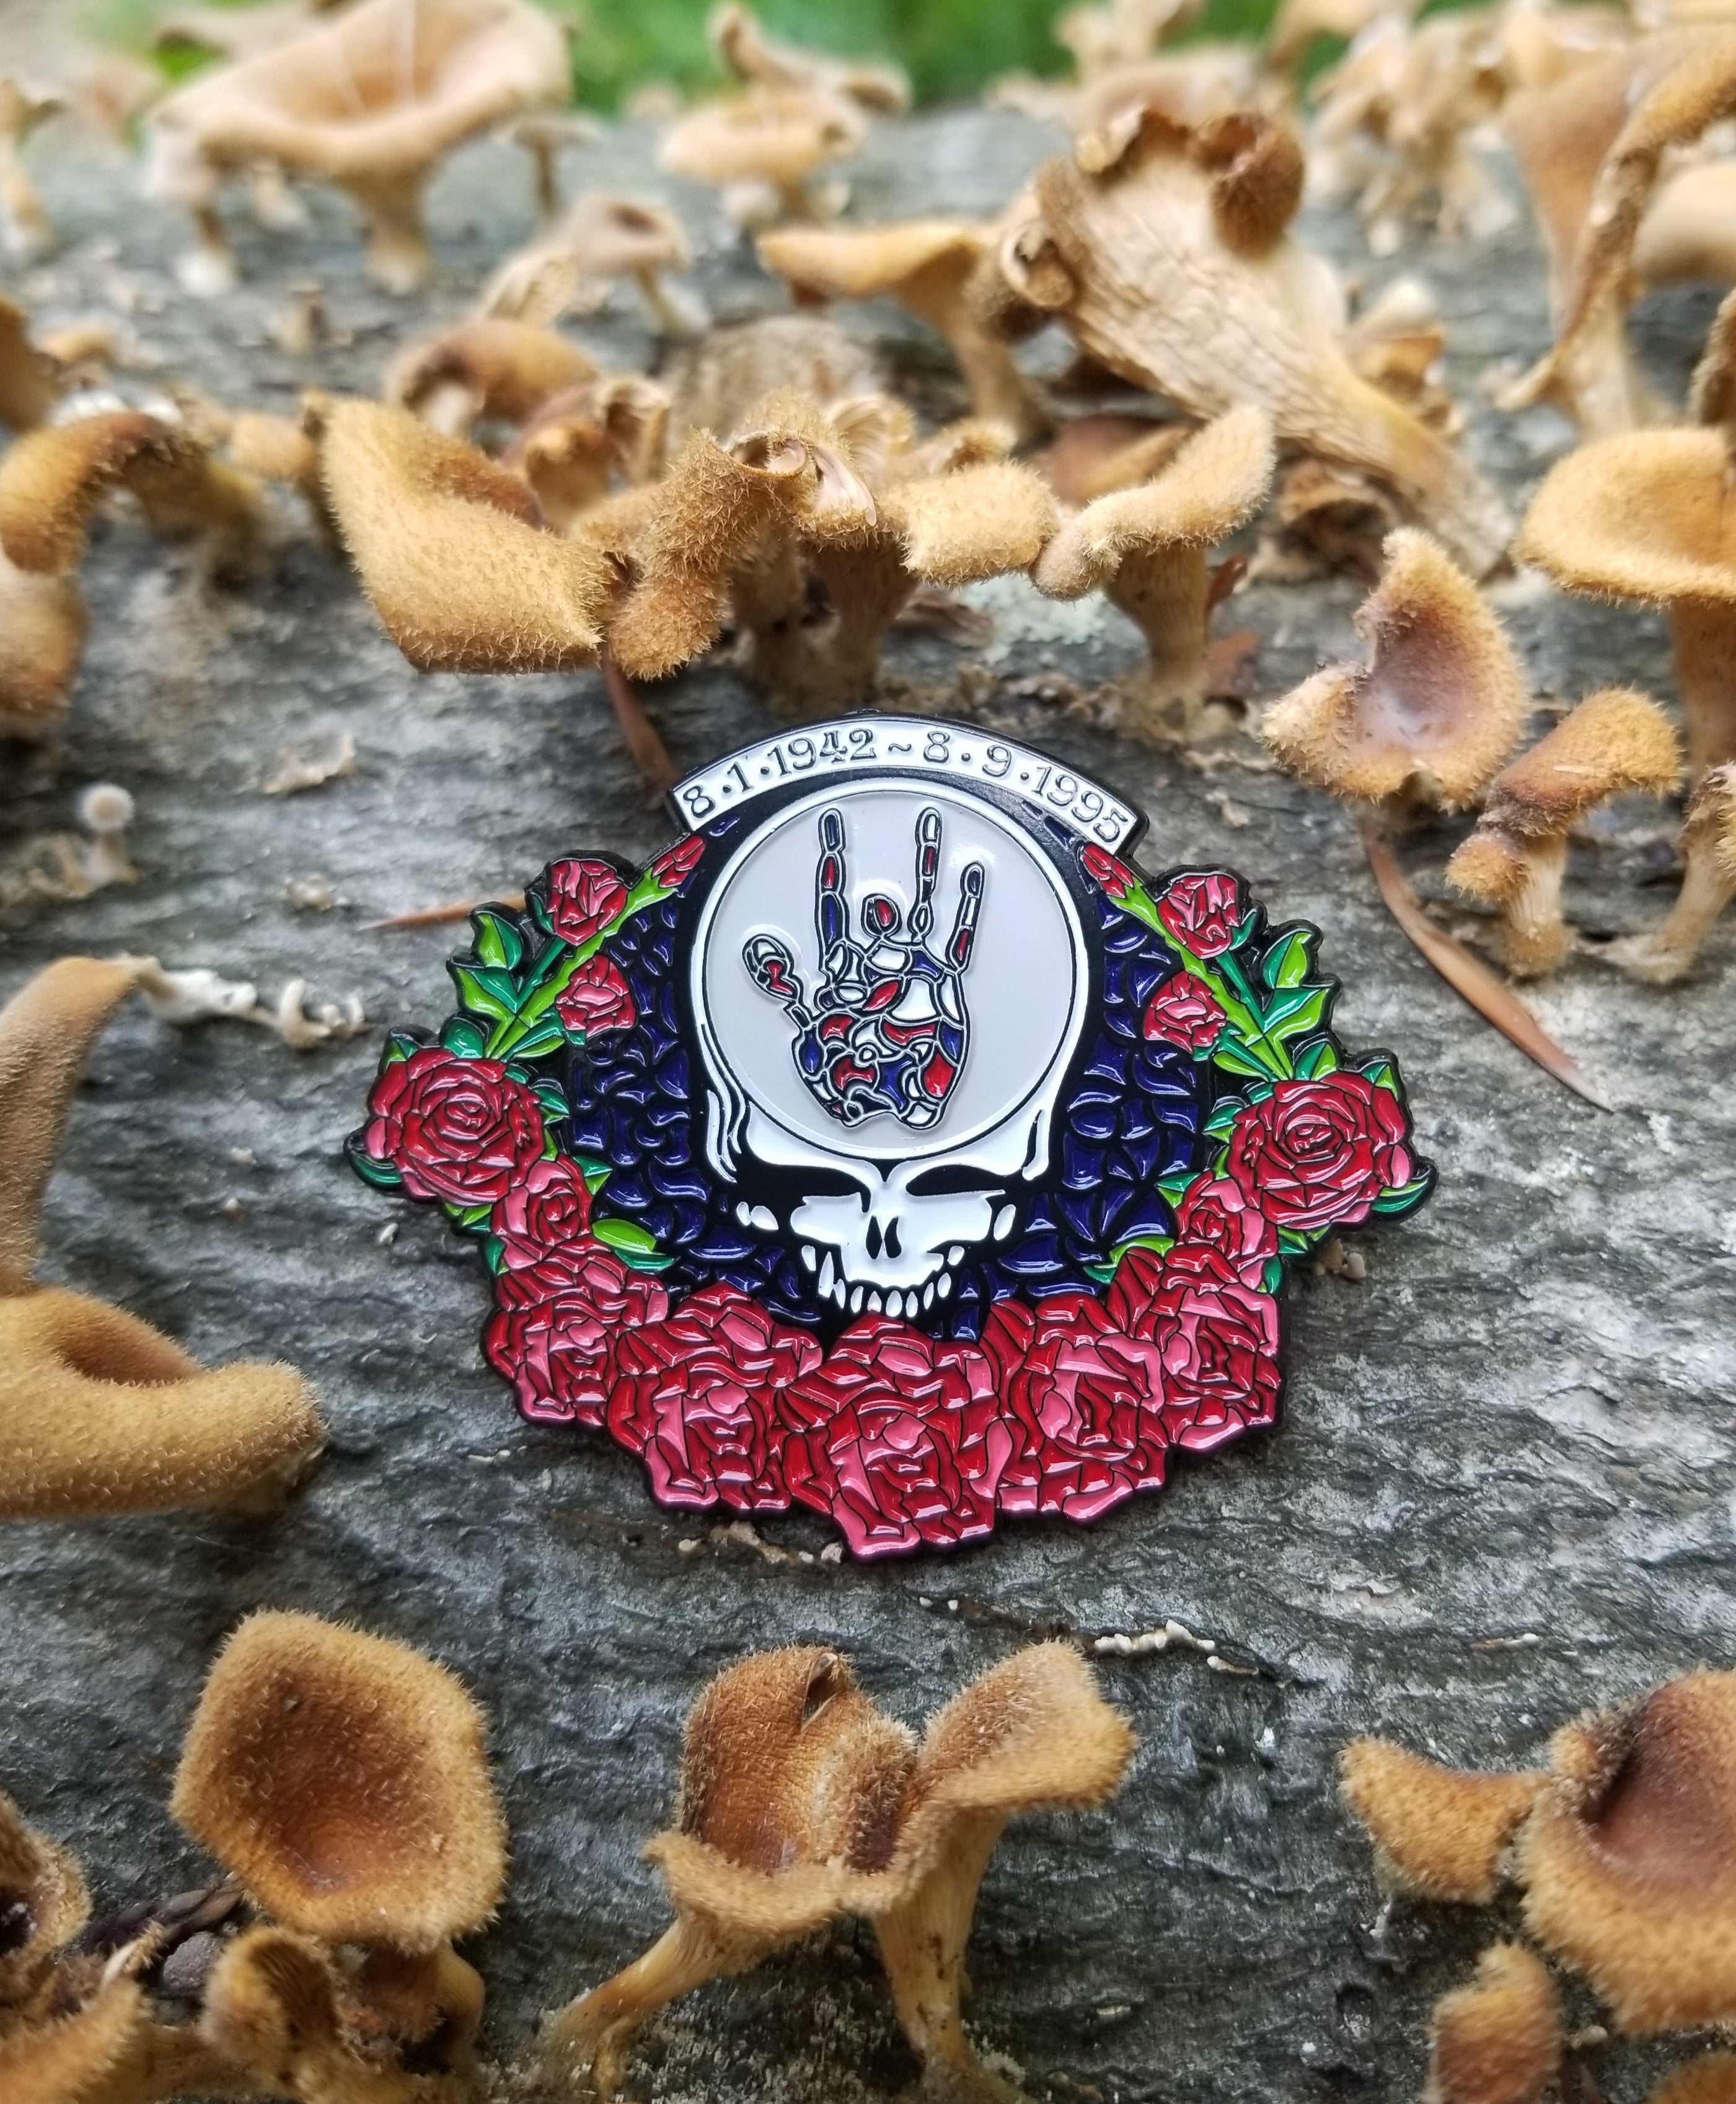 What Are Soft Enamel Pins? - What Are The Pros & Cons Of Soft Enamel Style Pins?